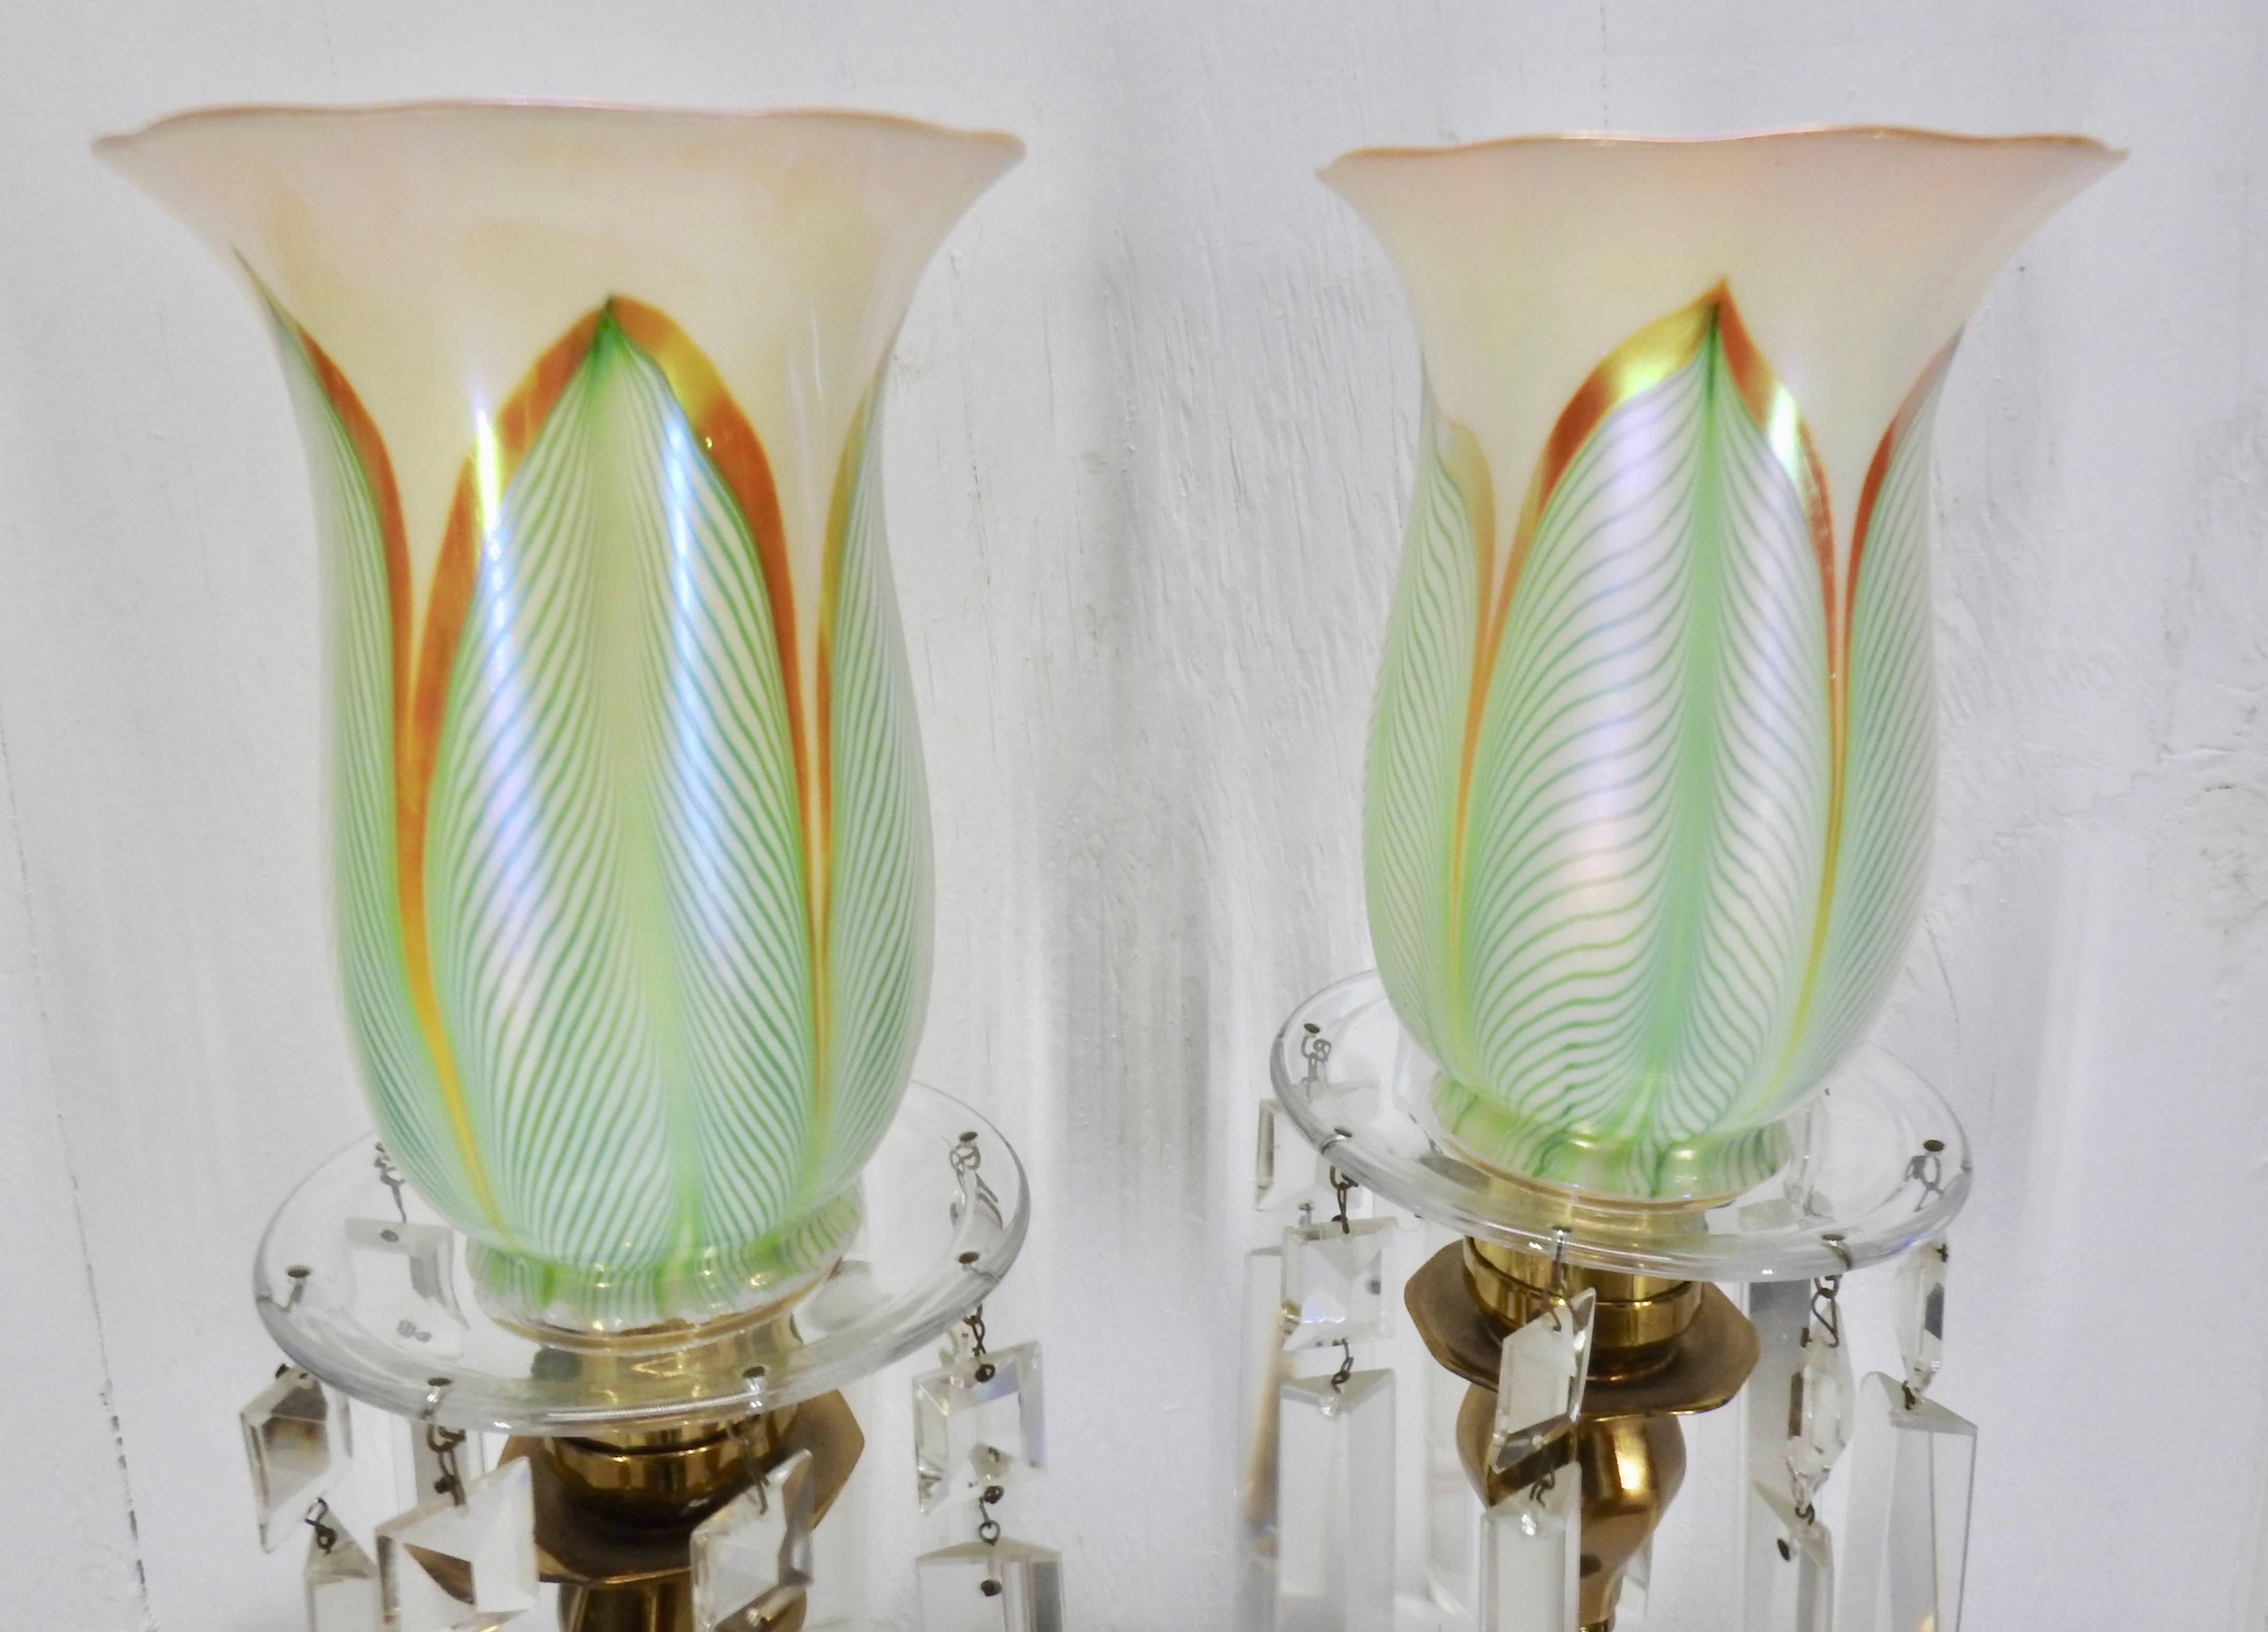 We are offering an exquisite pair of antique brass lamps with Steuben “Pulled Feather” pattern glass shades. The lamps feature a clear glass bobesche dish topping an eight-sided brass body with a raised foot. Eight faceted crystal prisms line the